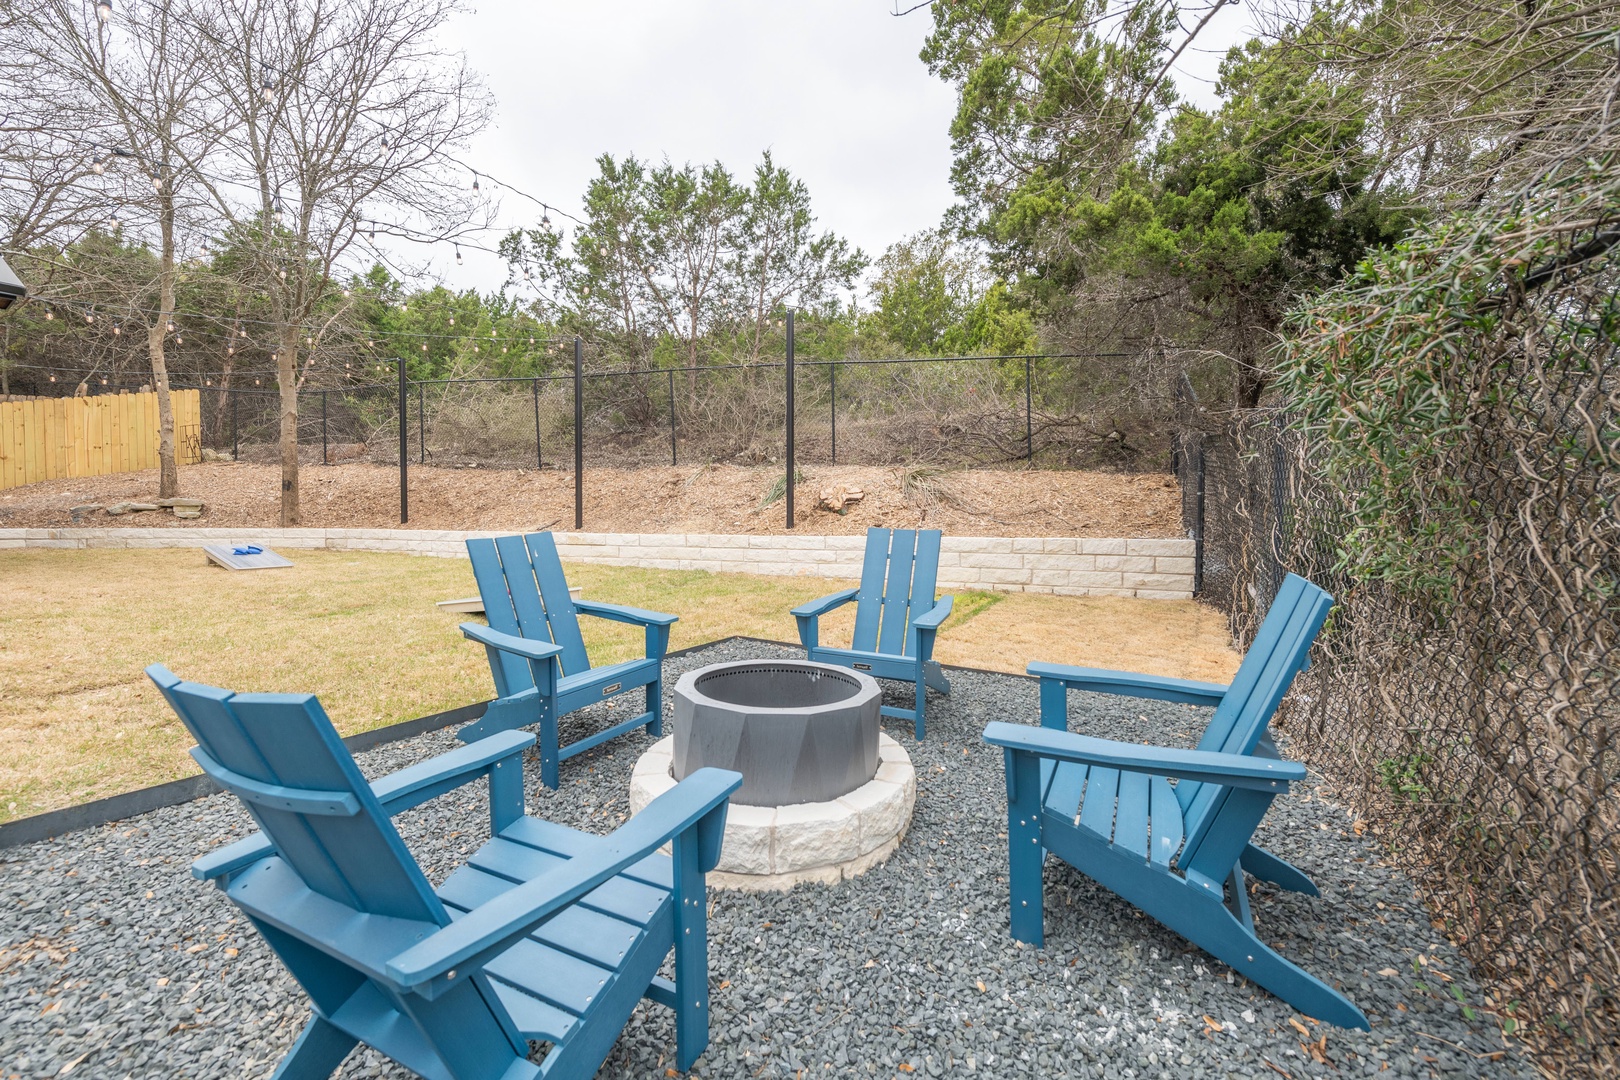 Back yard with more seating, grill, firepit, and corn hole